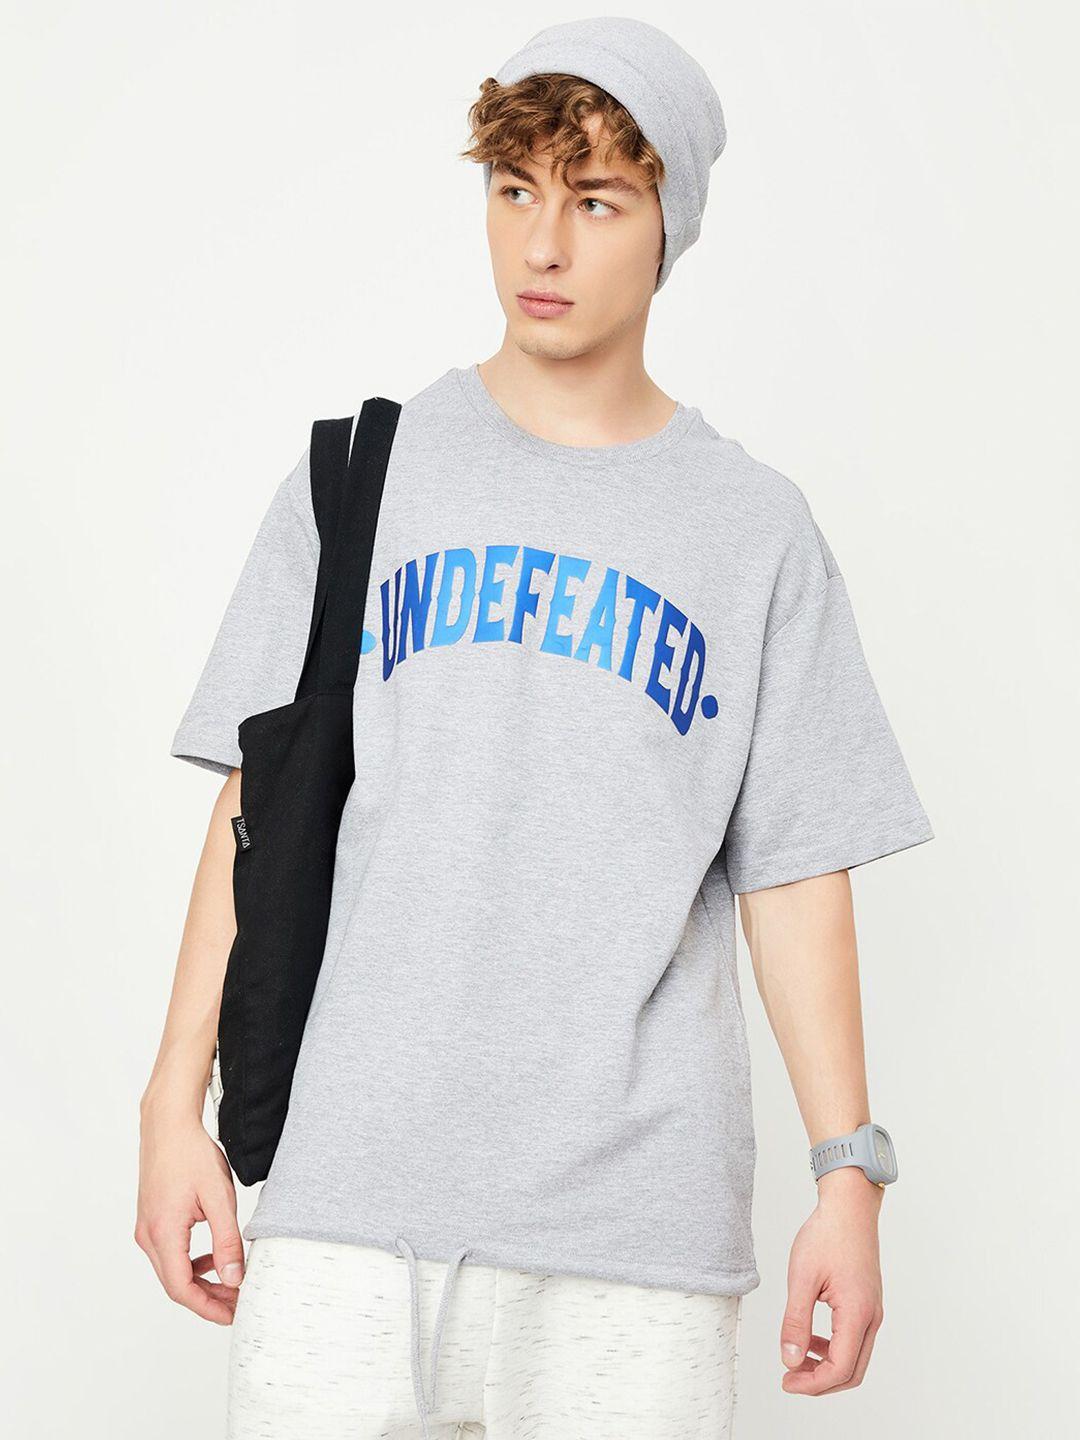 max typography printed cotton t-shirt